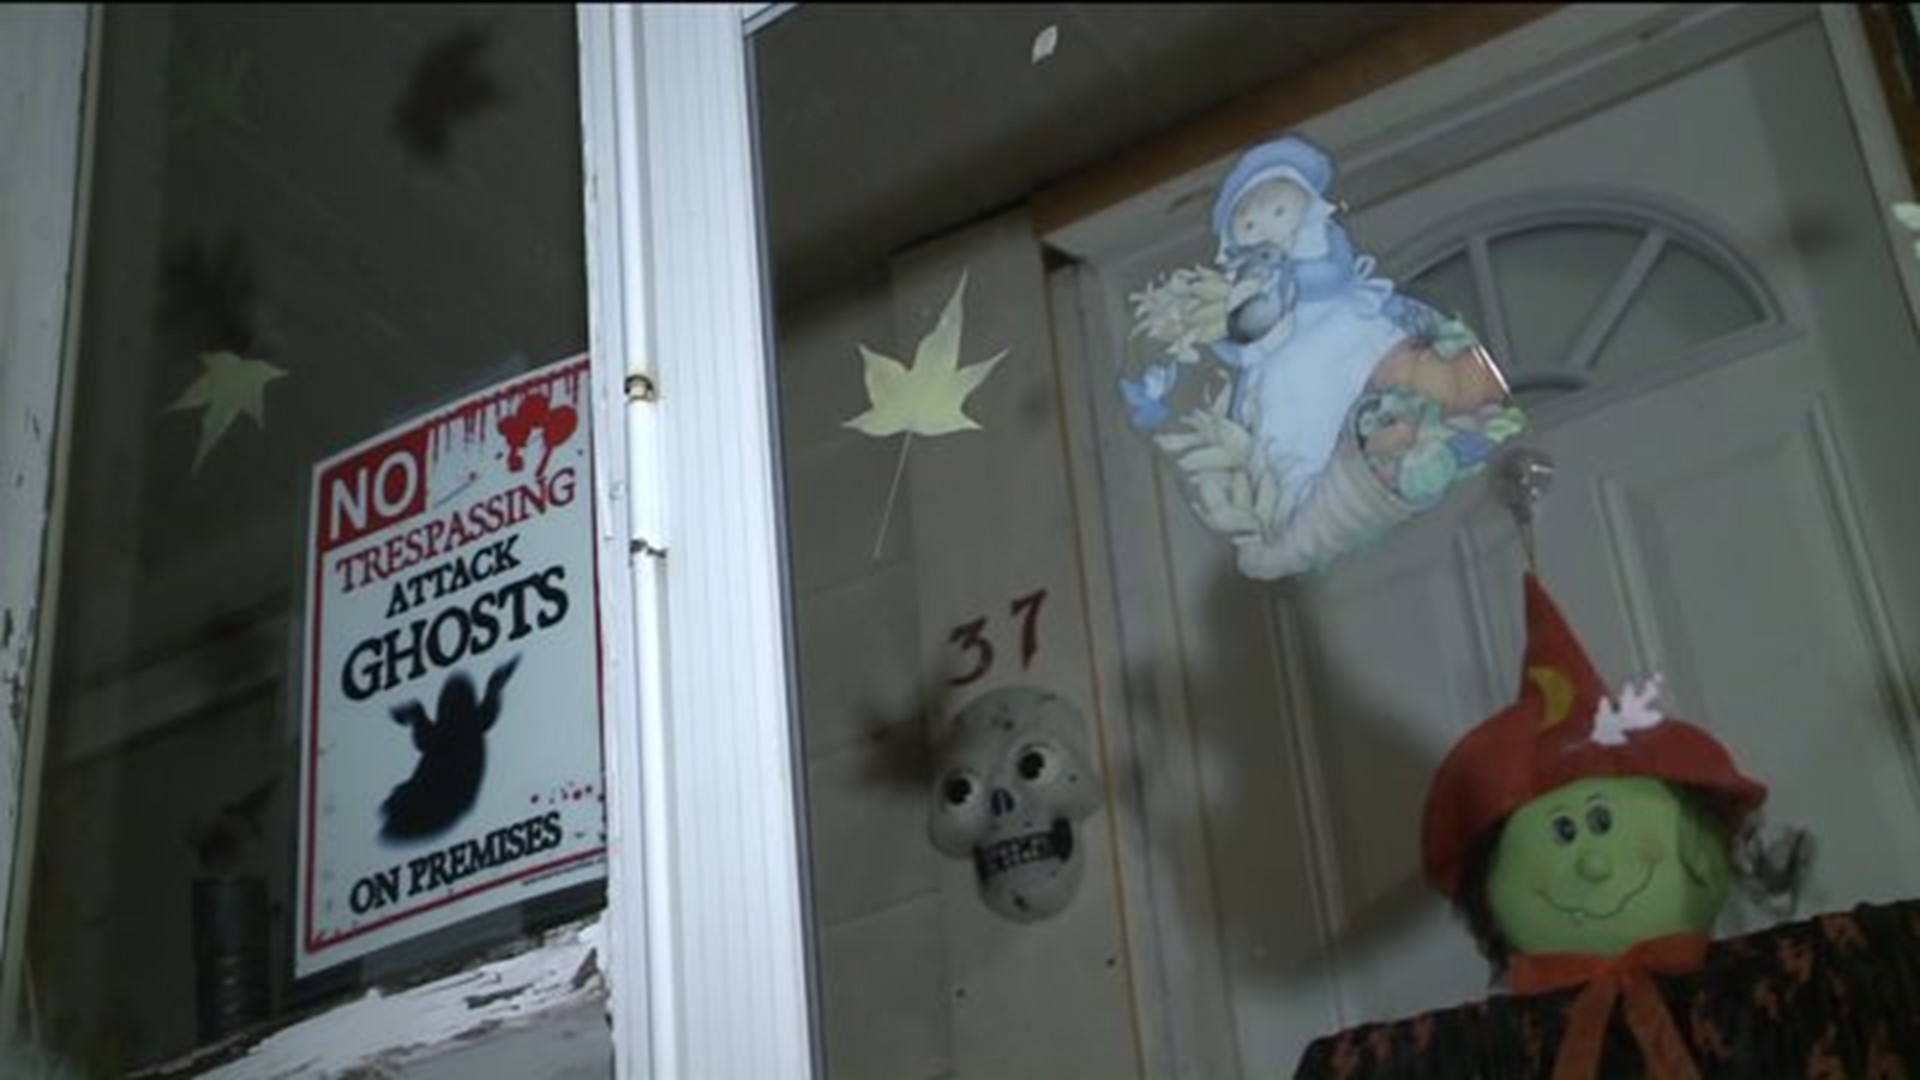 Owners of Enfield`s "Demon House" share their story to visitors